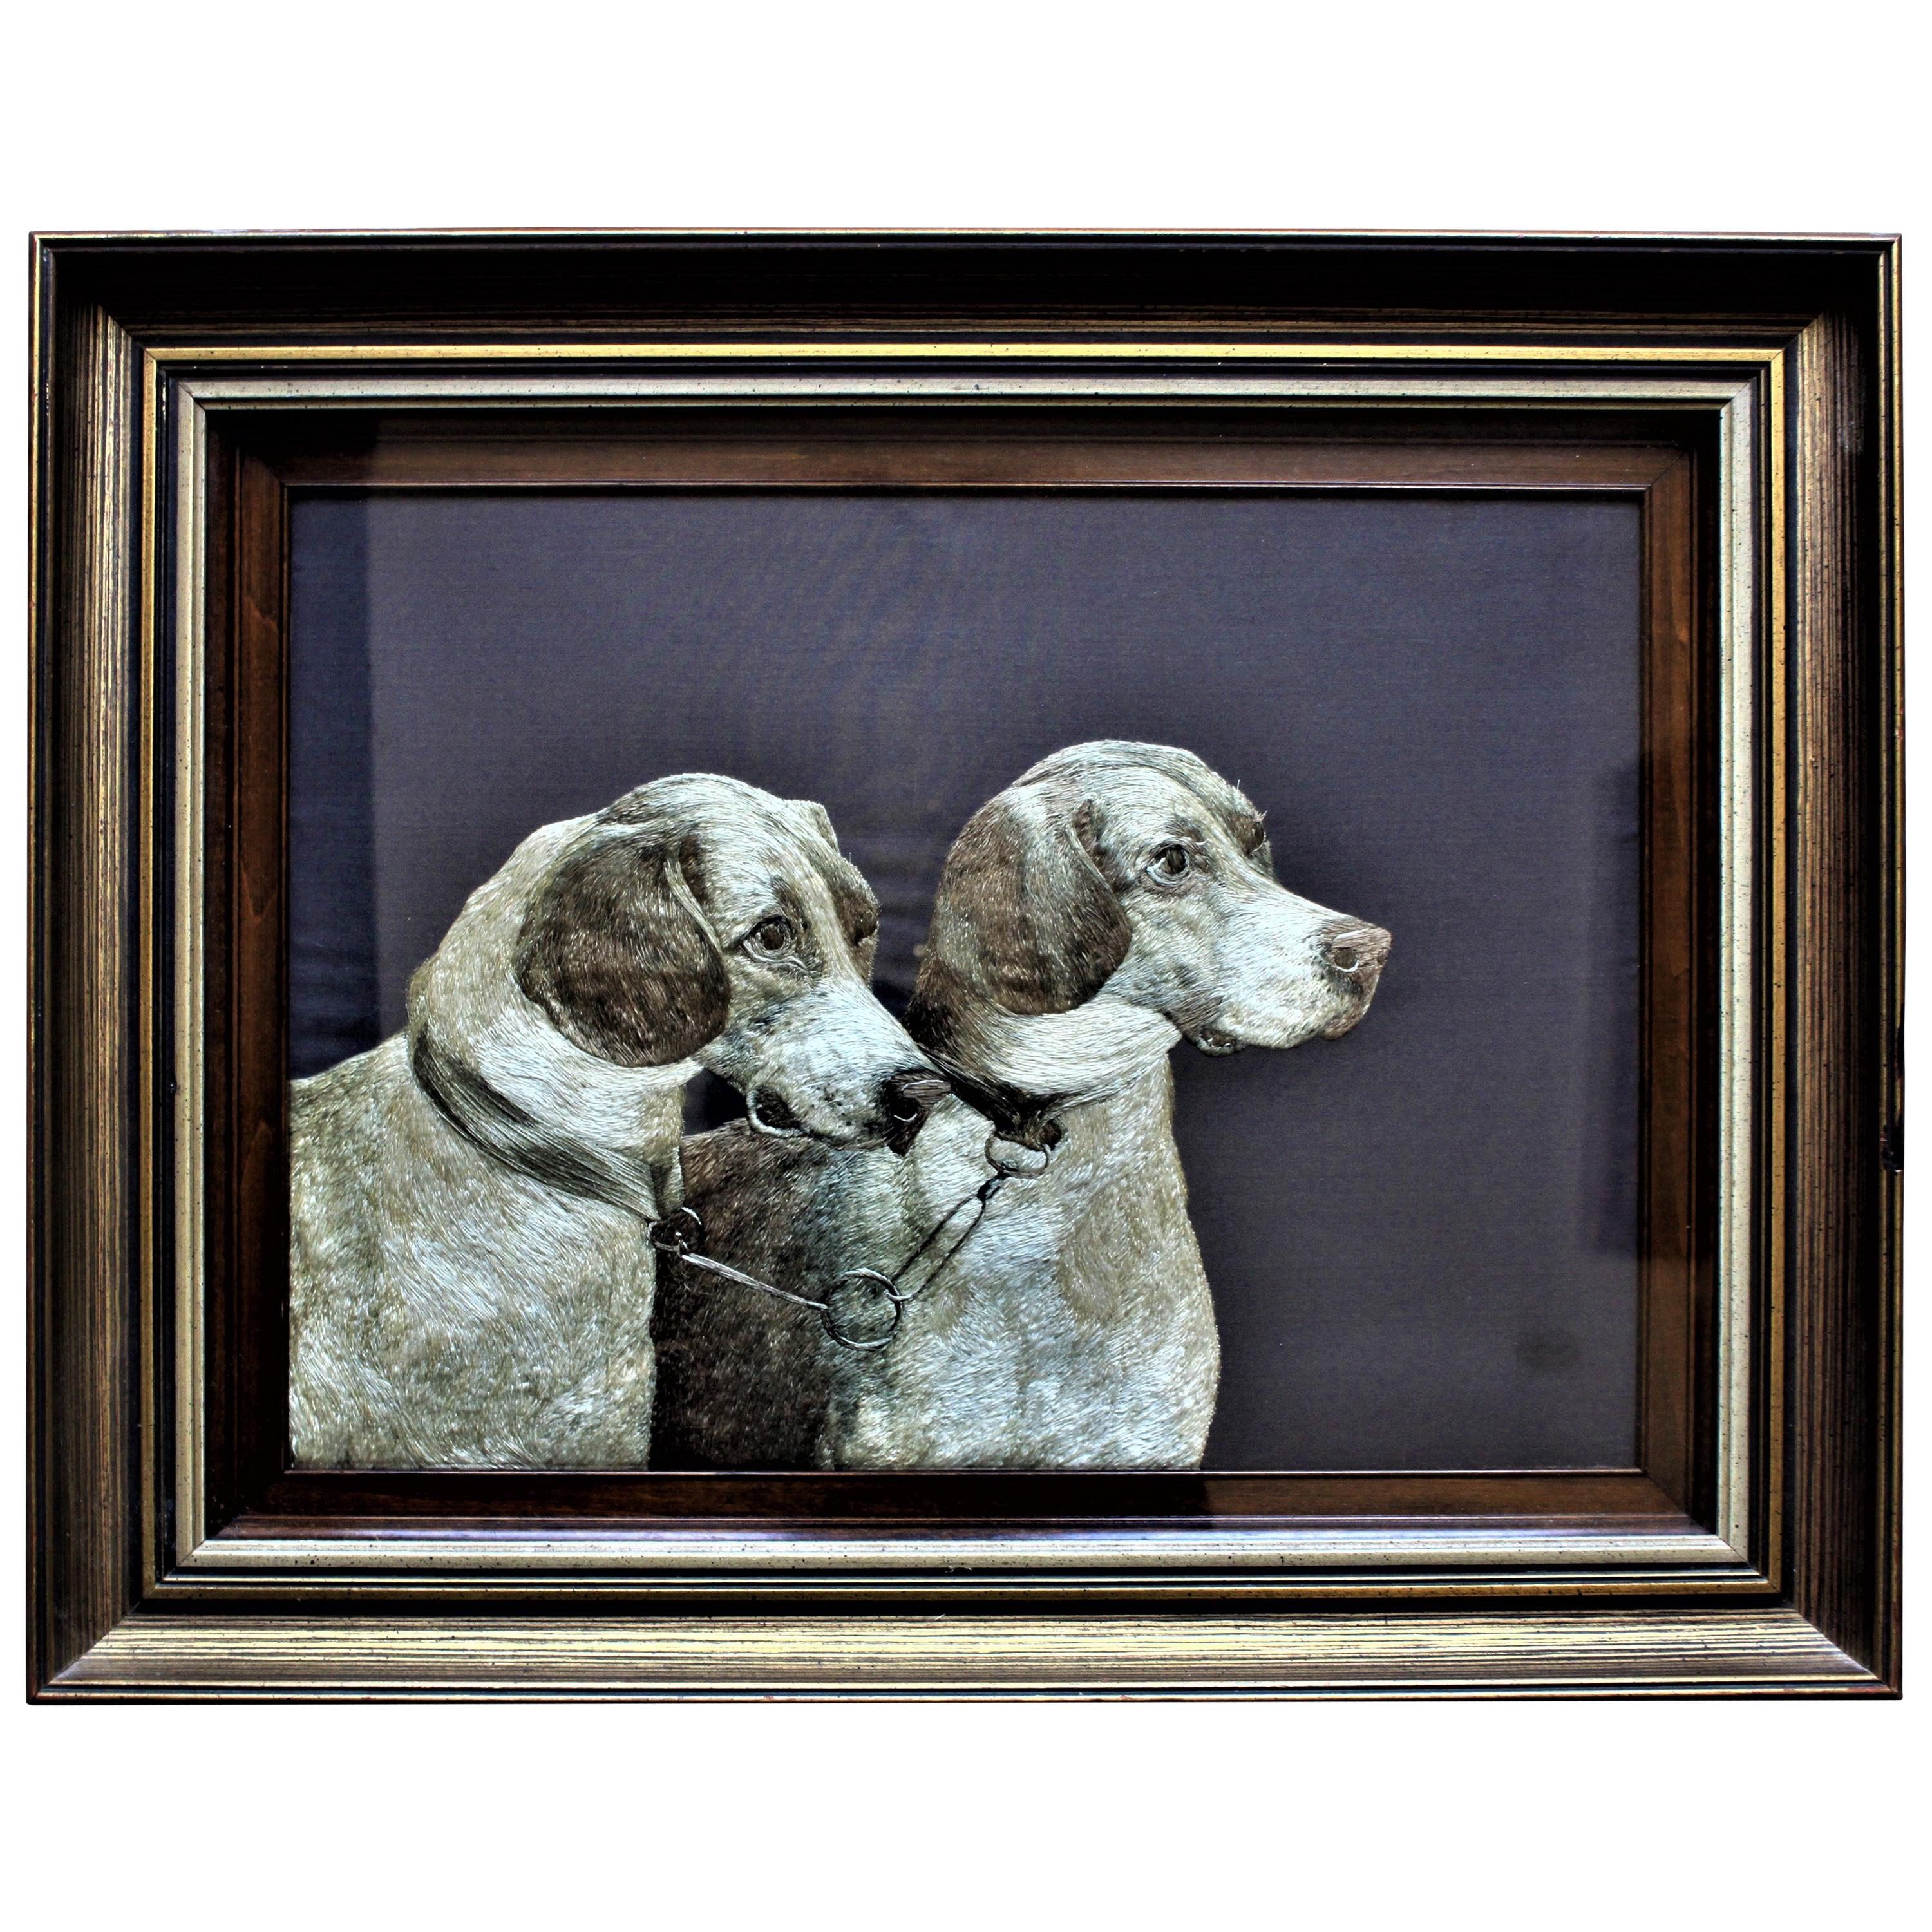 American Arts & Crafts Framed Silk Embroidery of Two Dogs